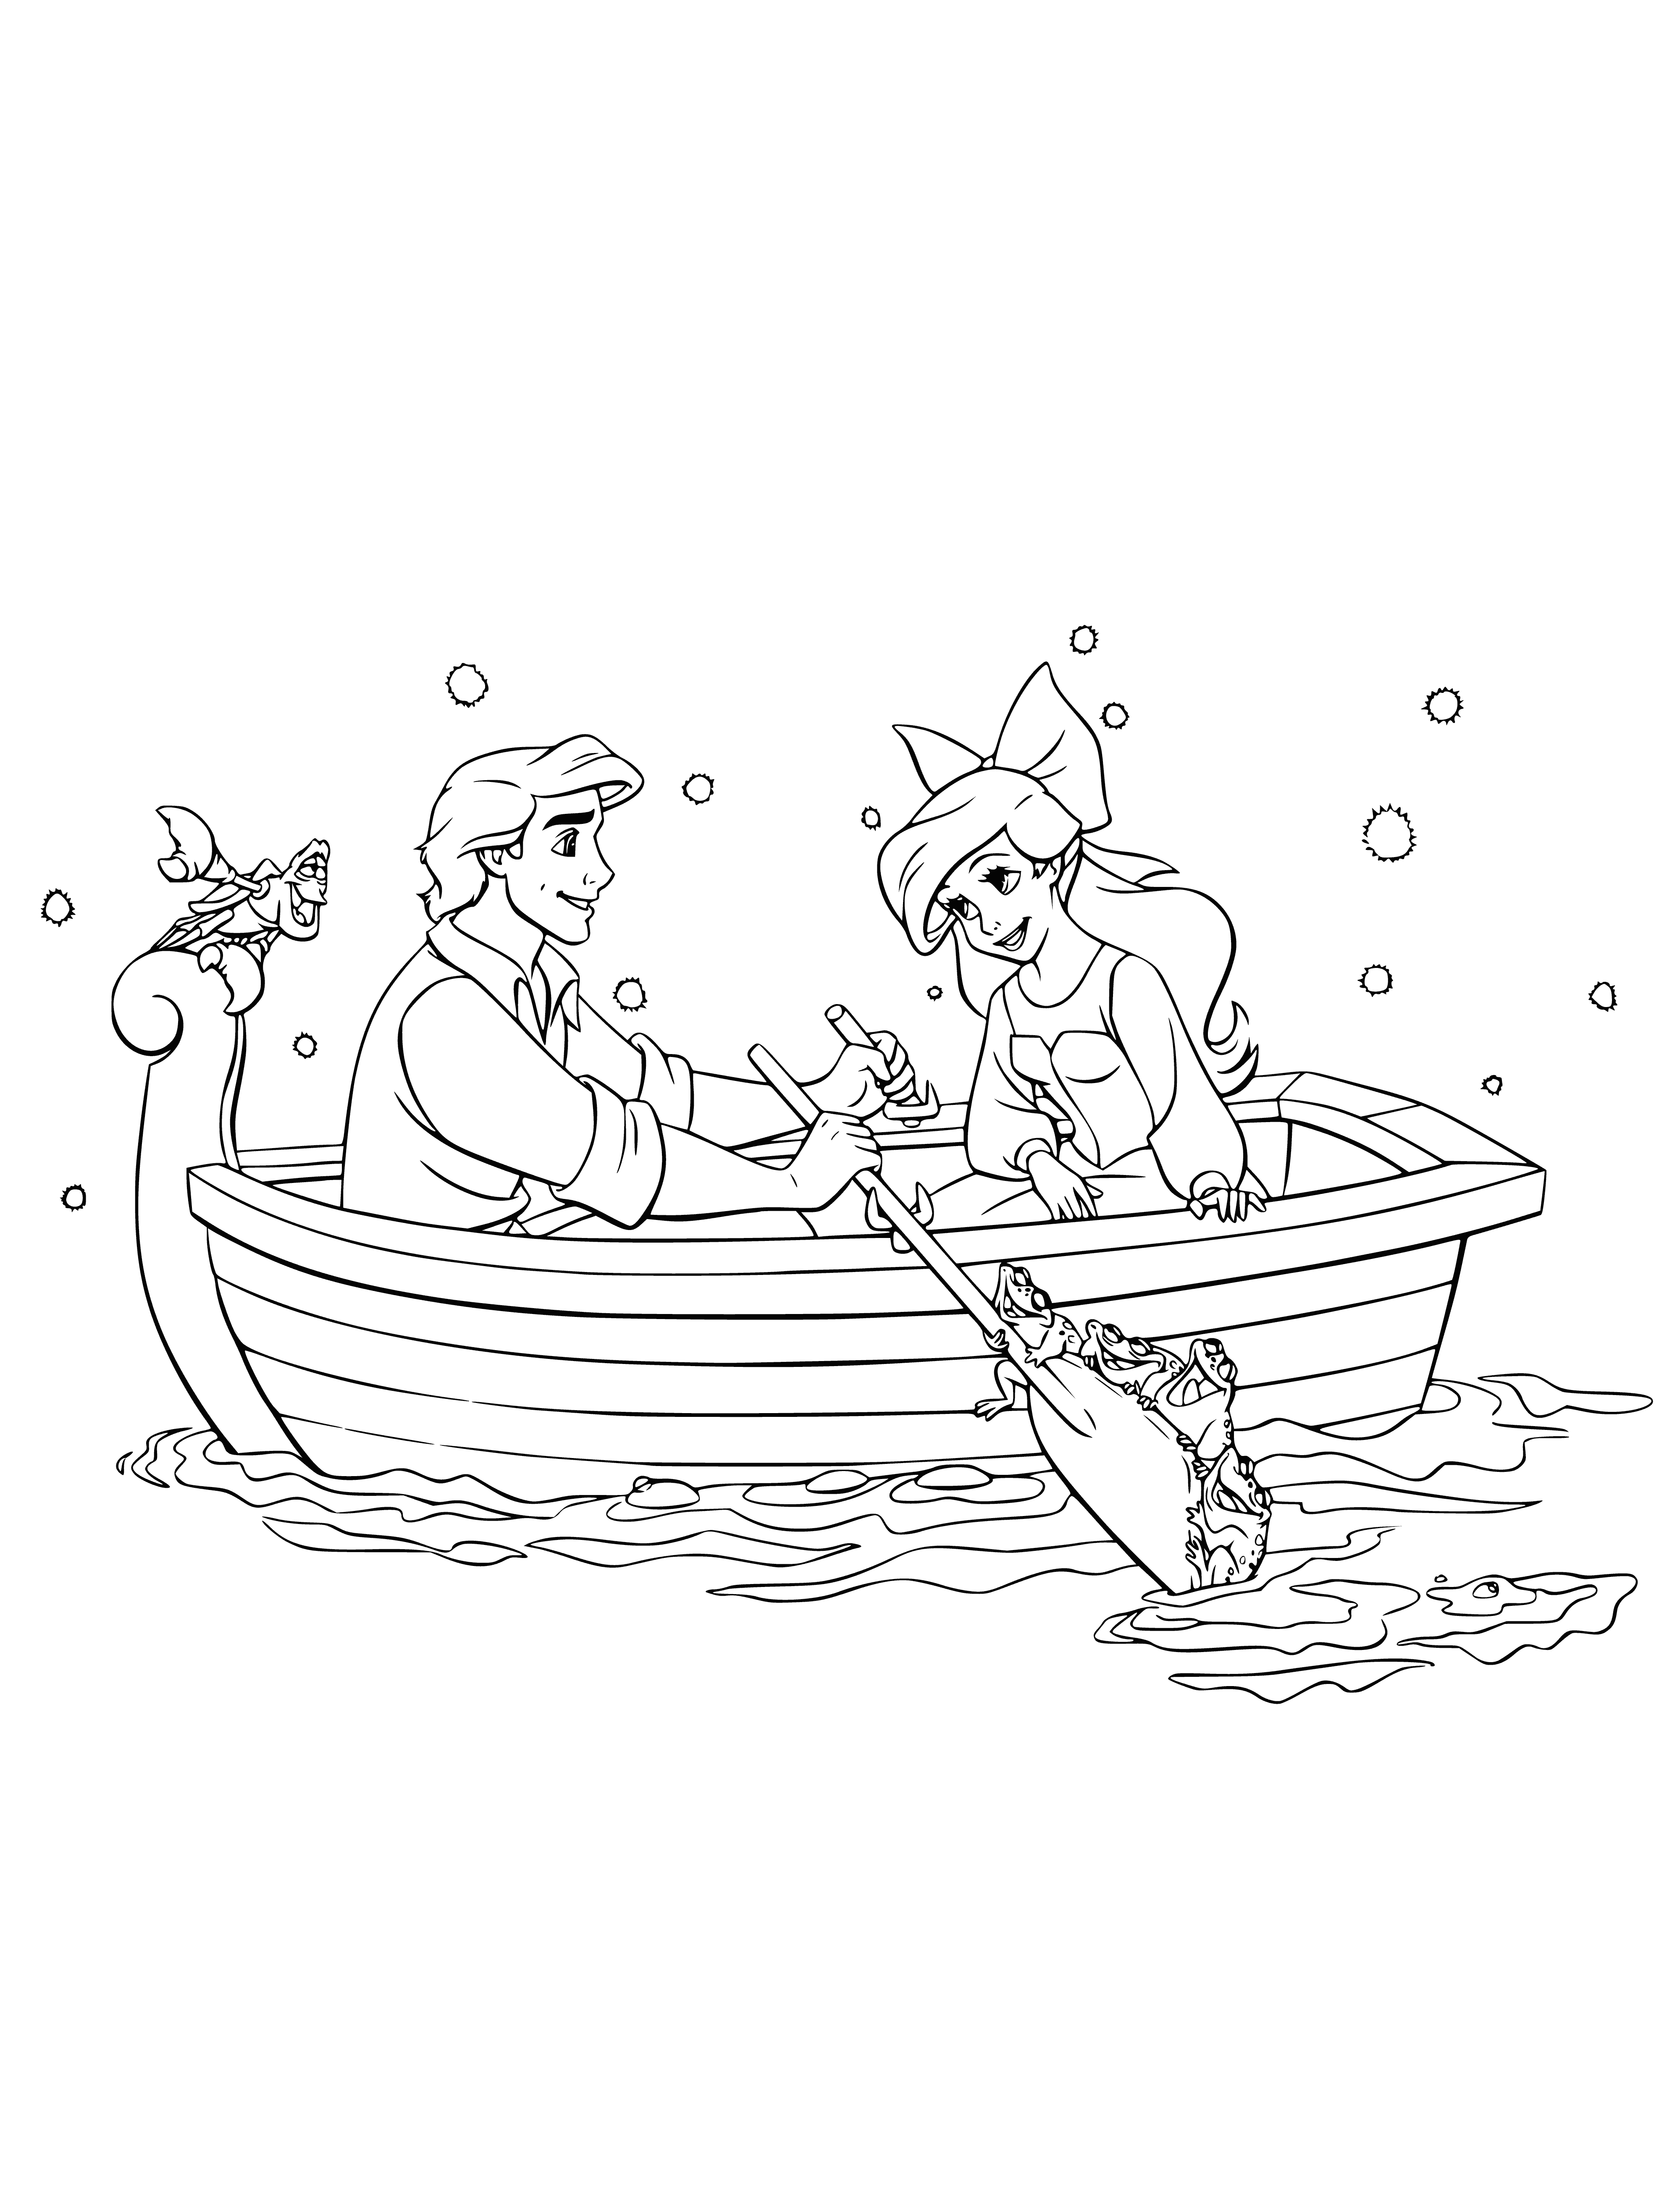 Prince and Ariel coloring page